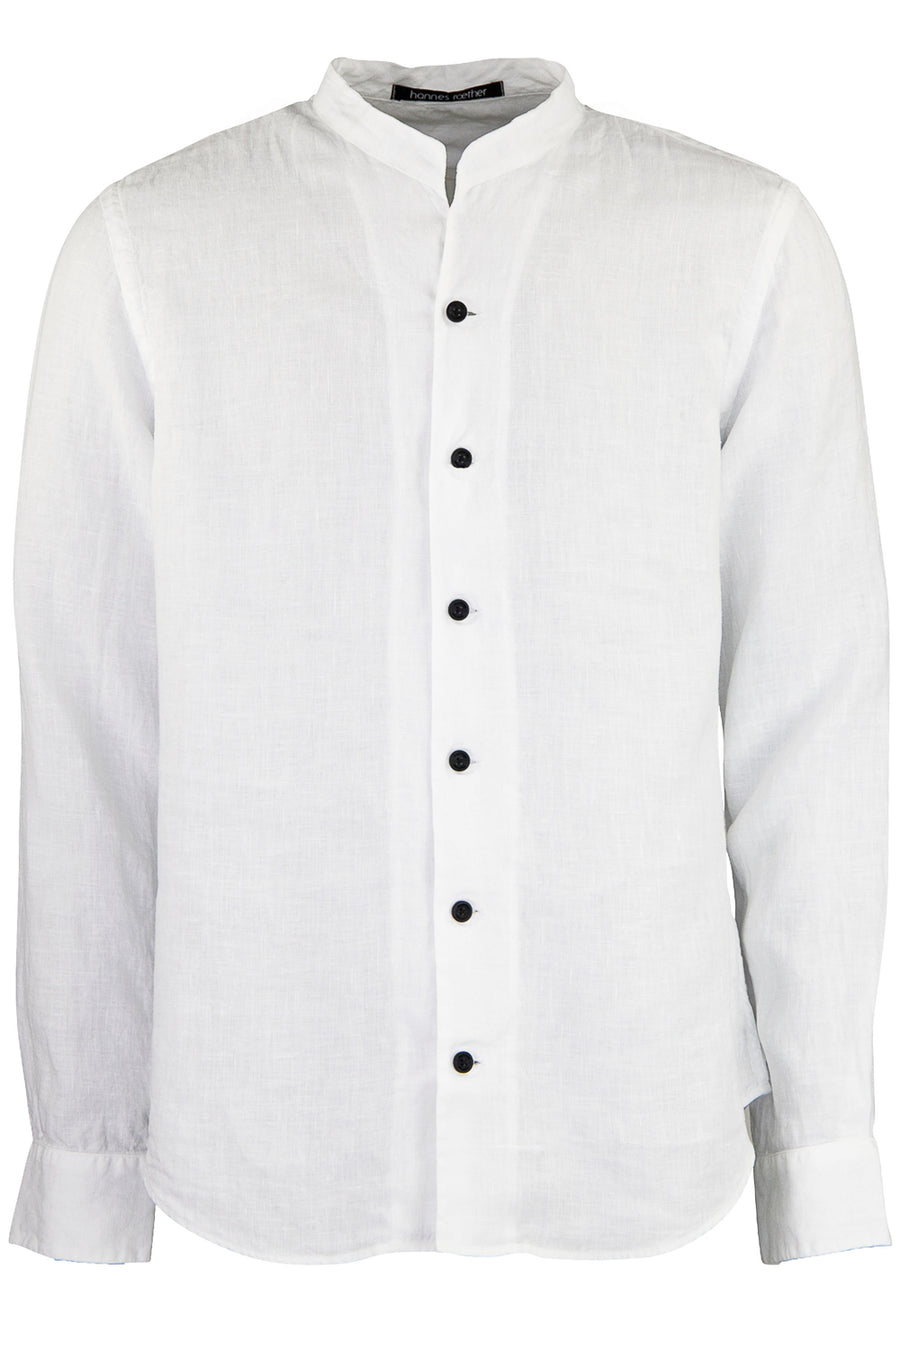 Buy the Hannes Roether Open Collar Linen Shirt in White at Intro. Spend £50 for free UK delivery. Official stockists. We ship worldwide.